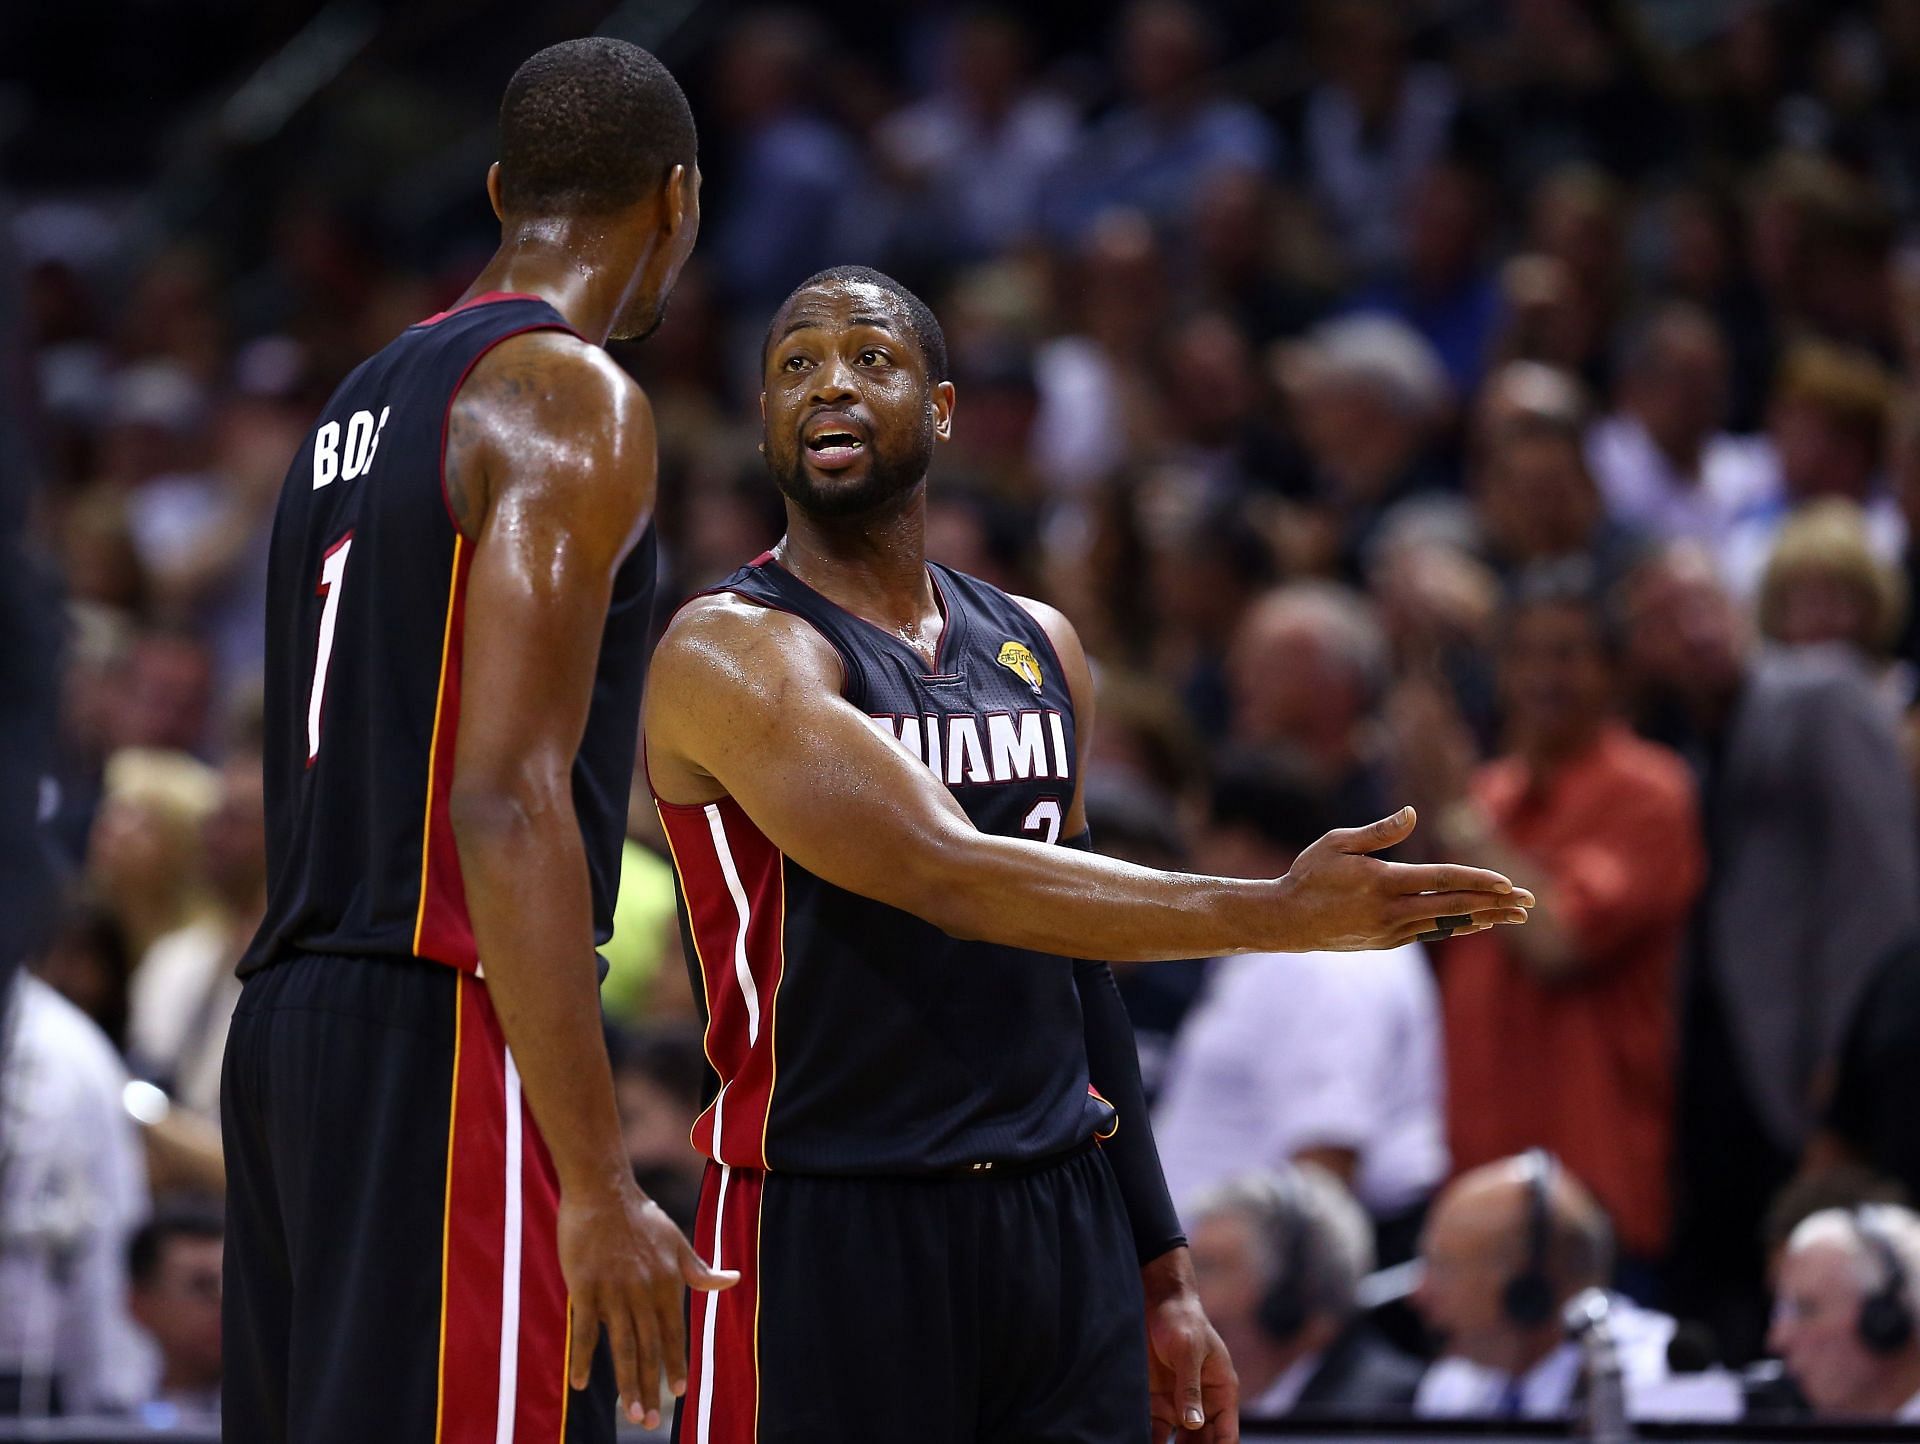 Chris Bosh and Dwyane Wade achieved a lot of success together.